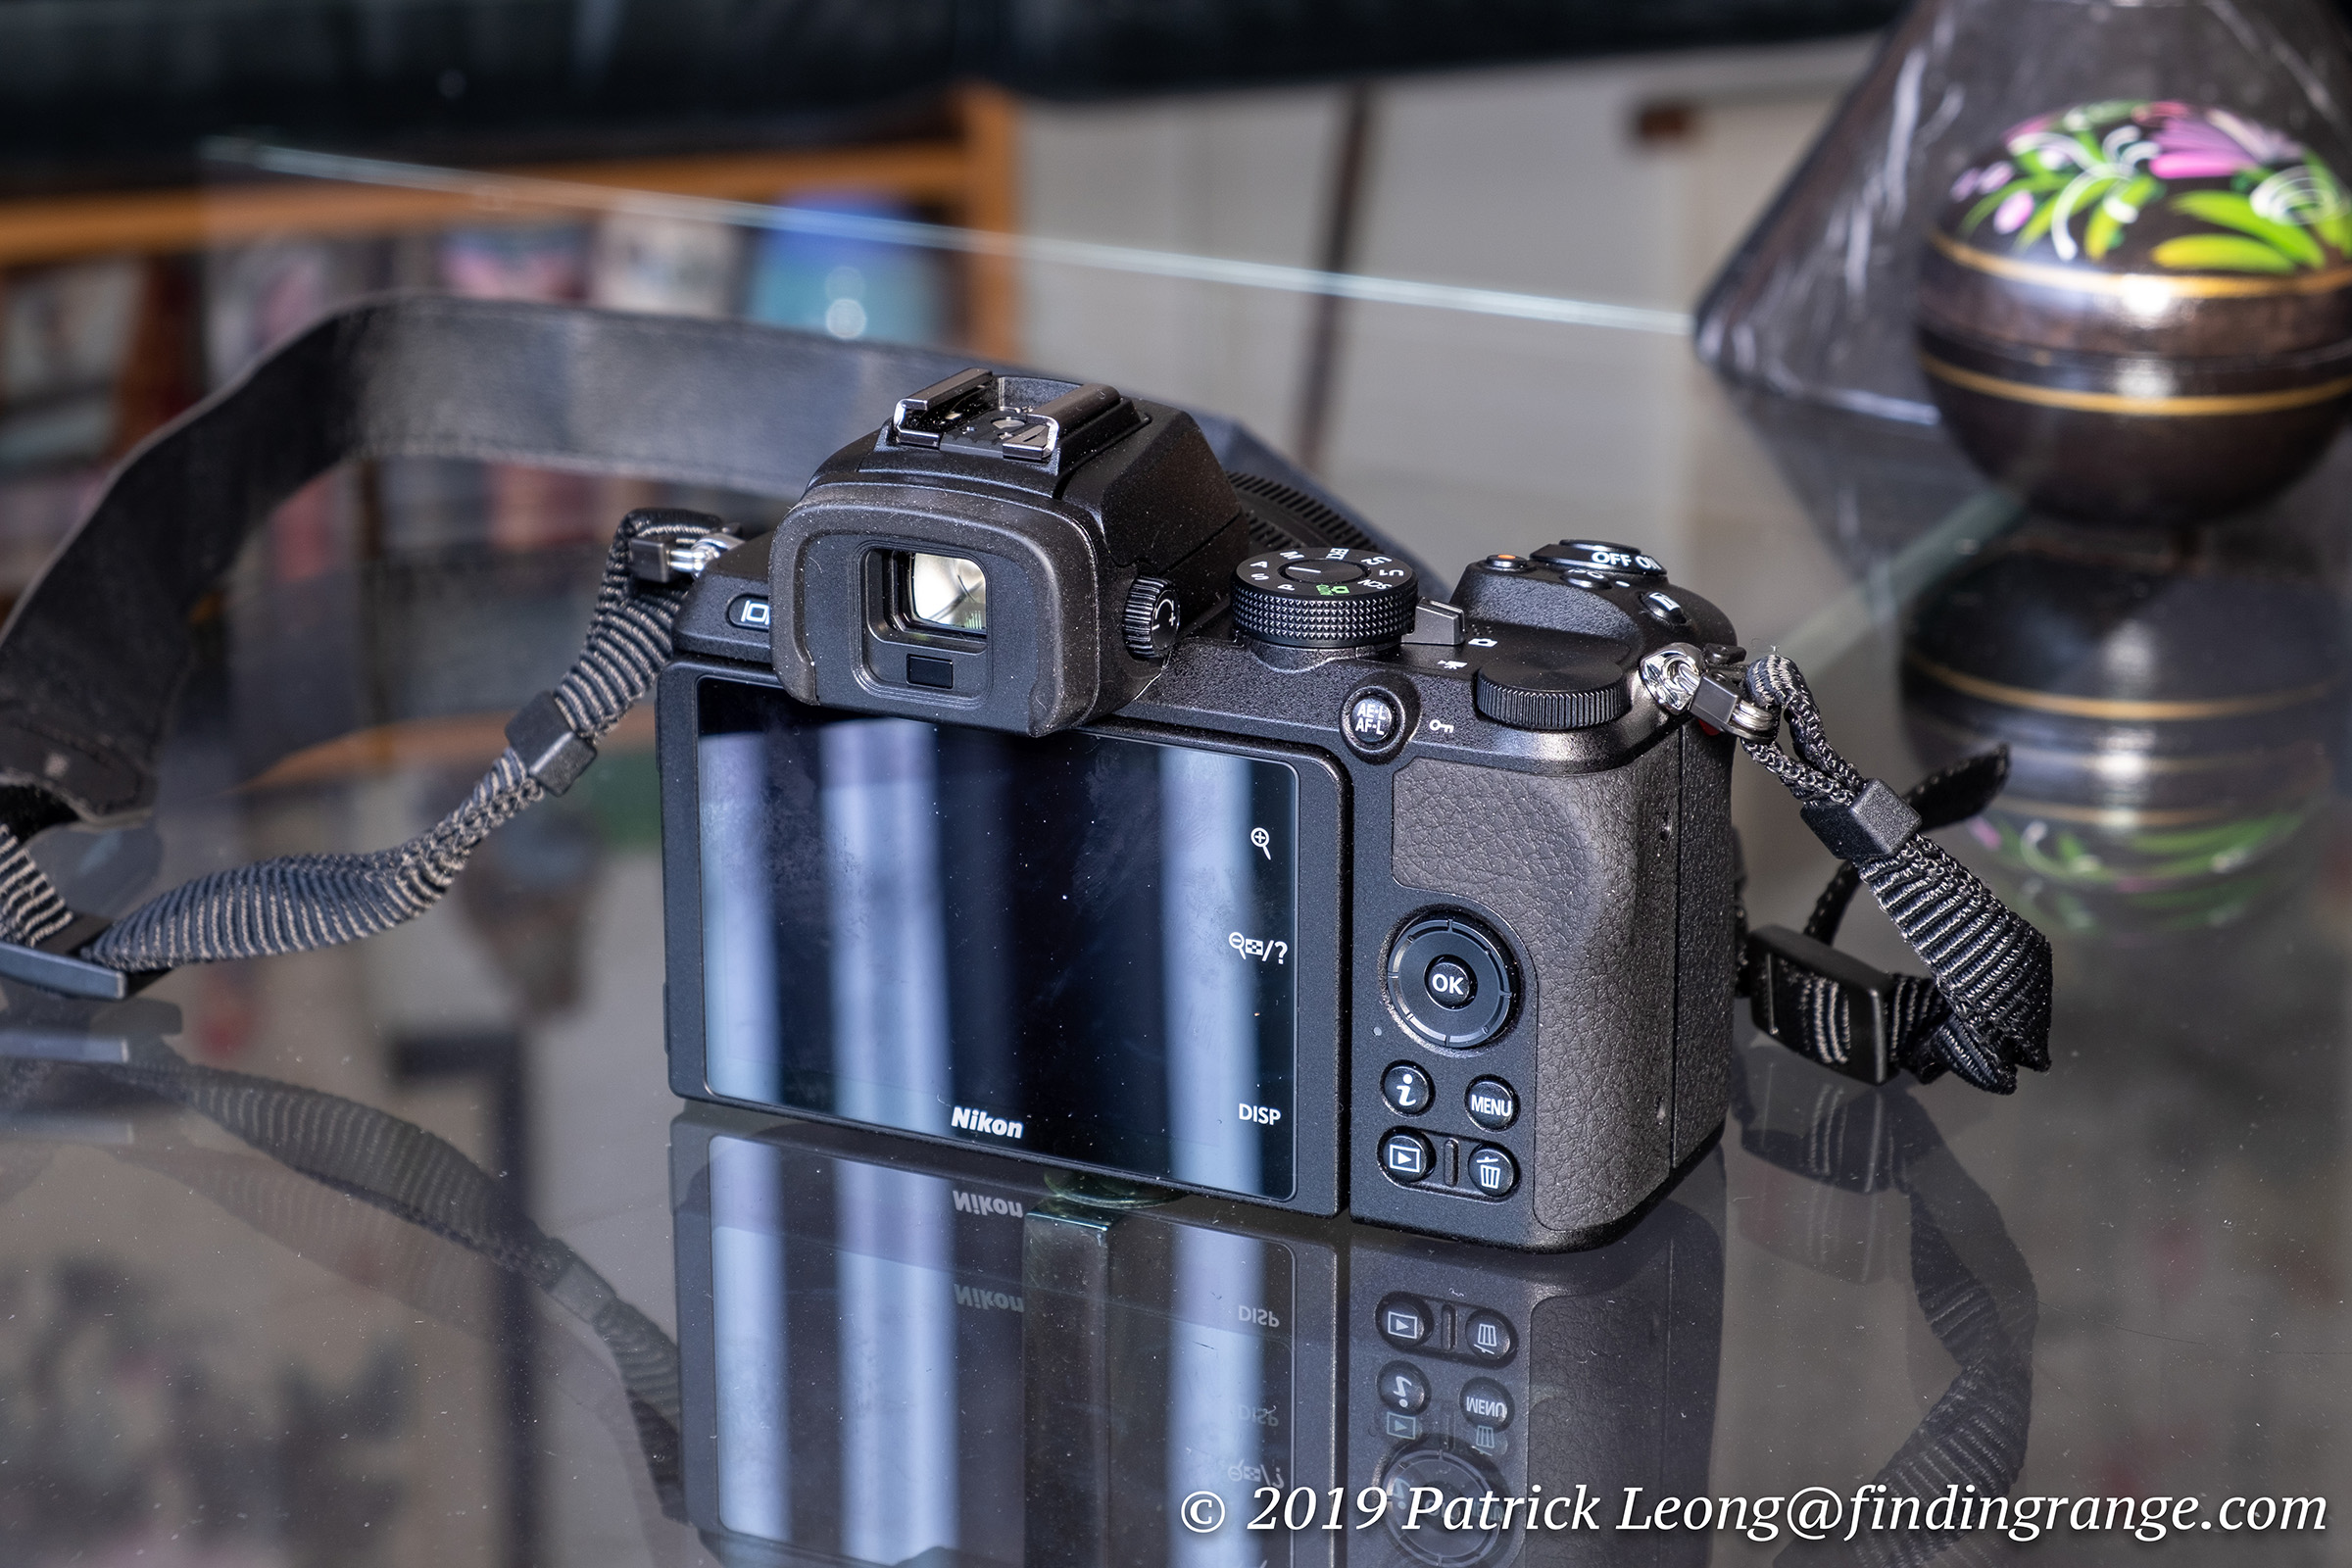 Opinion: The Nikon Z50 is a good camera, but that may not be